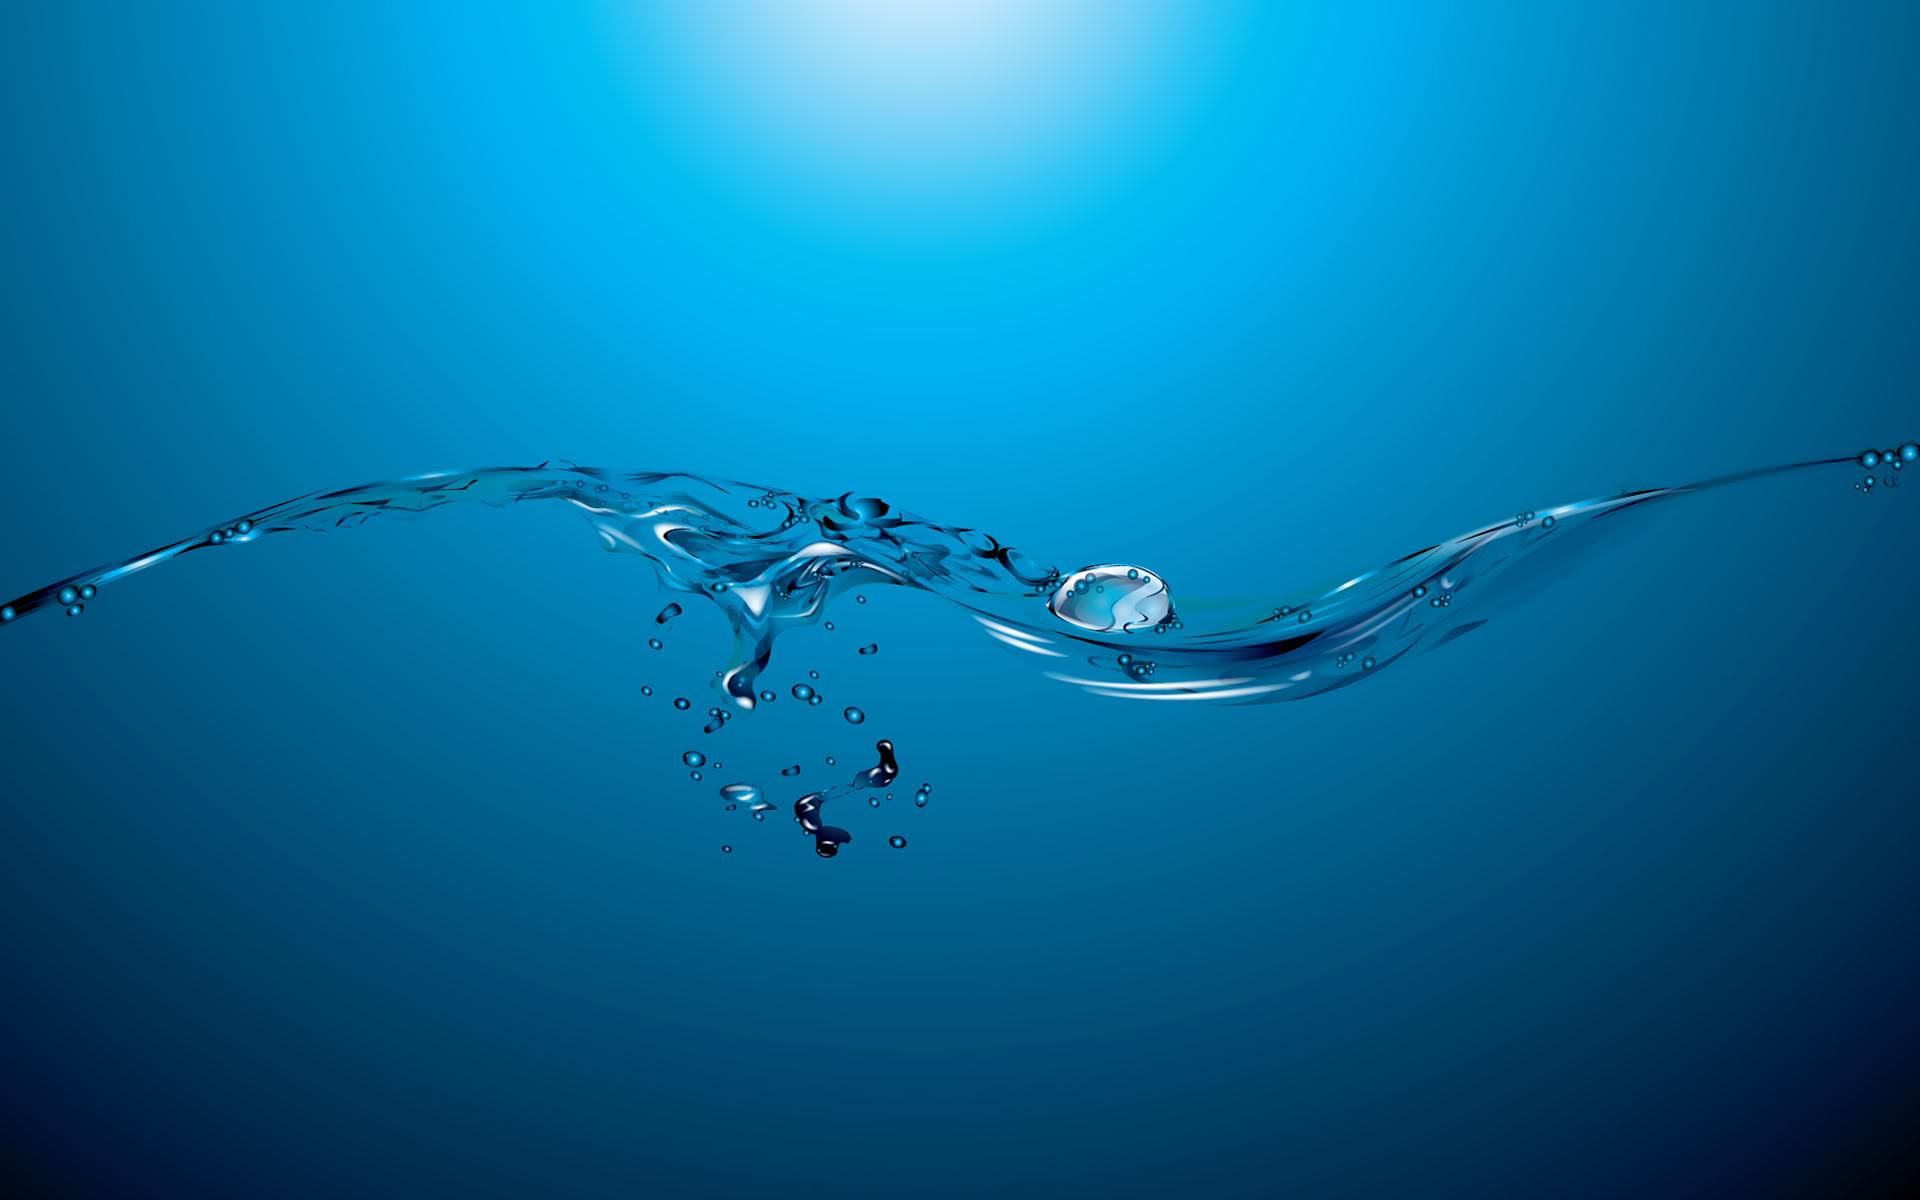 Collection of Water Drops Wallpaper HD Background image